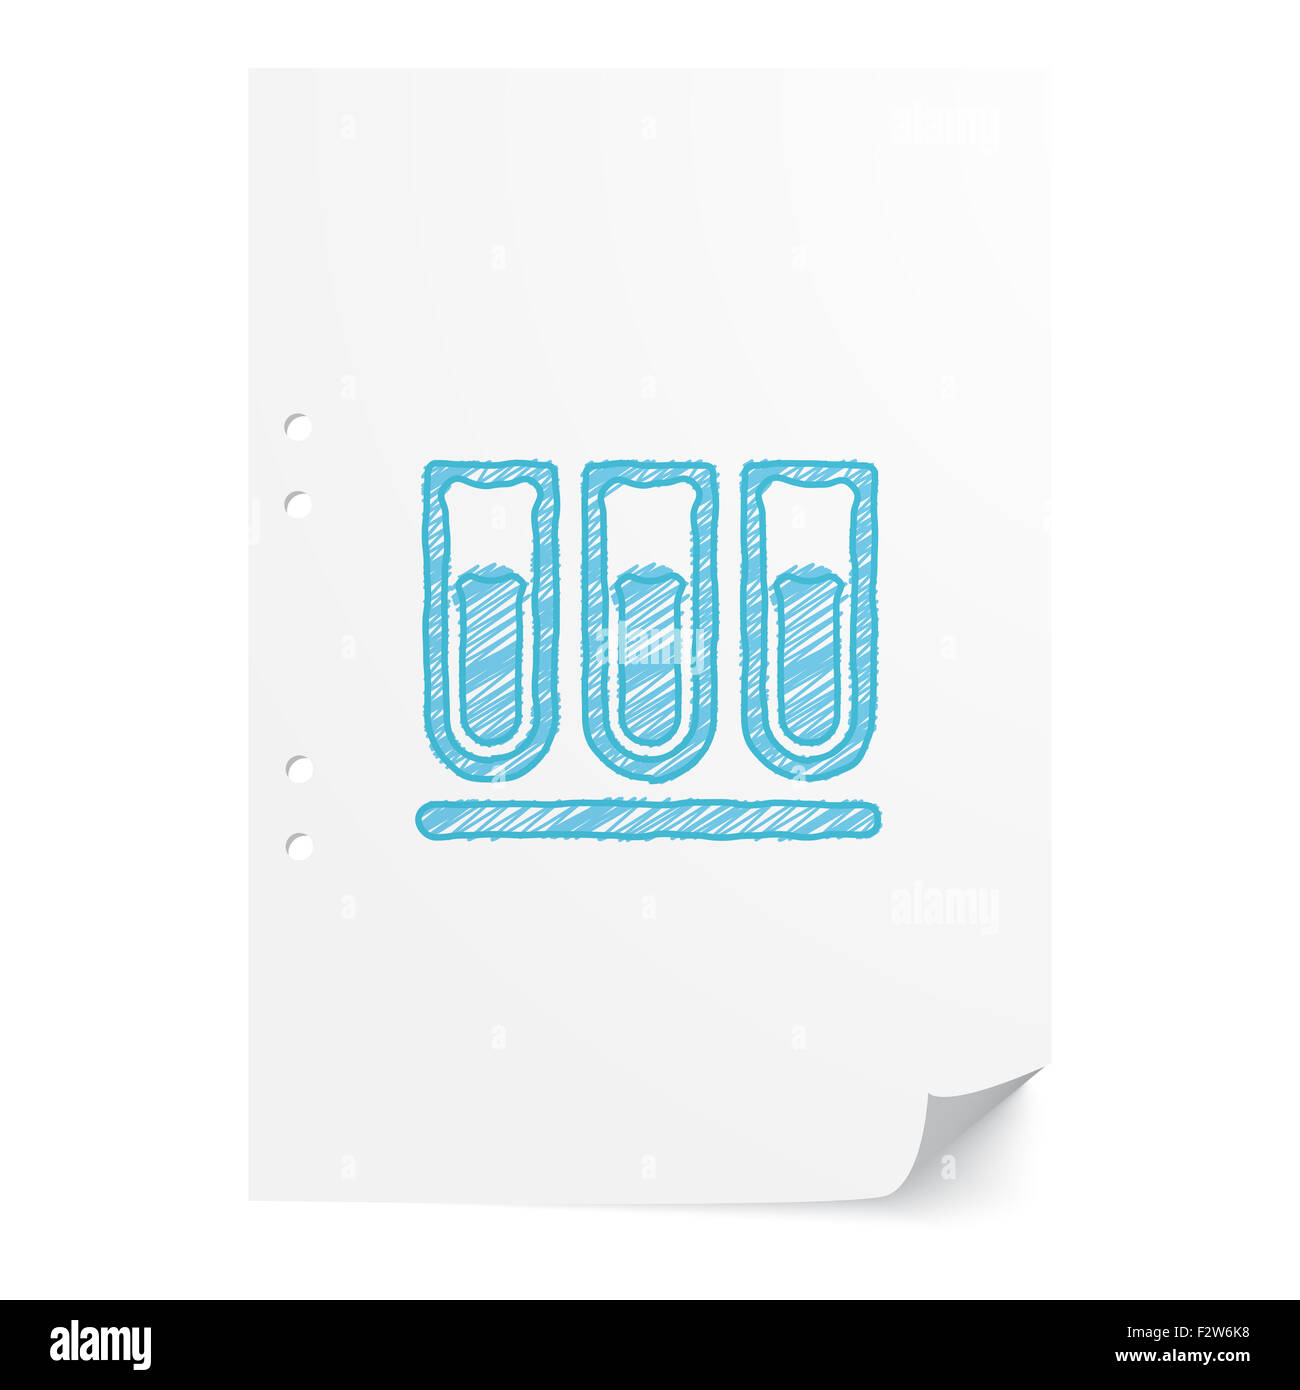 Blue handdrawn Test Tube illustration on white paper sheet with copy space Stock Photo